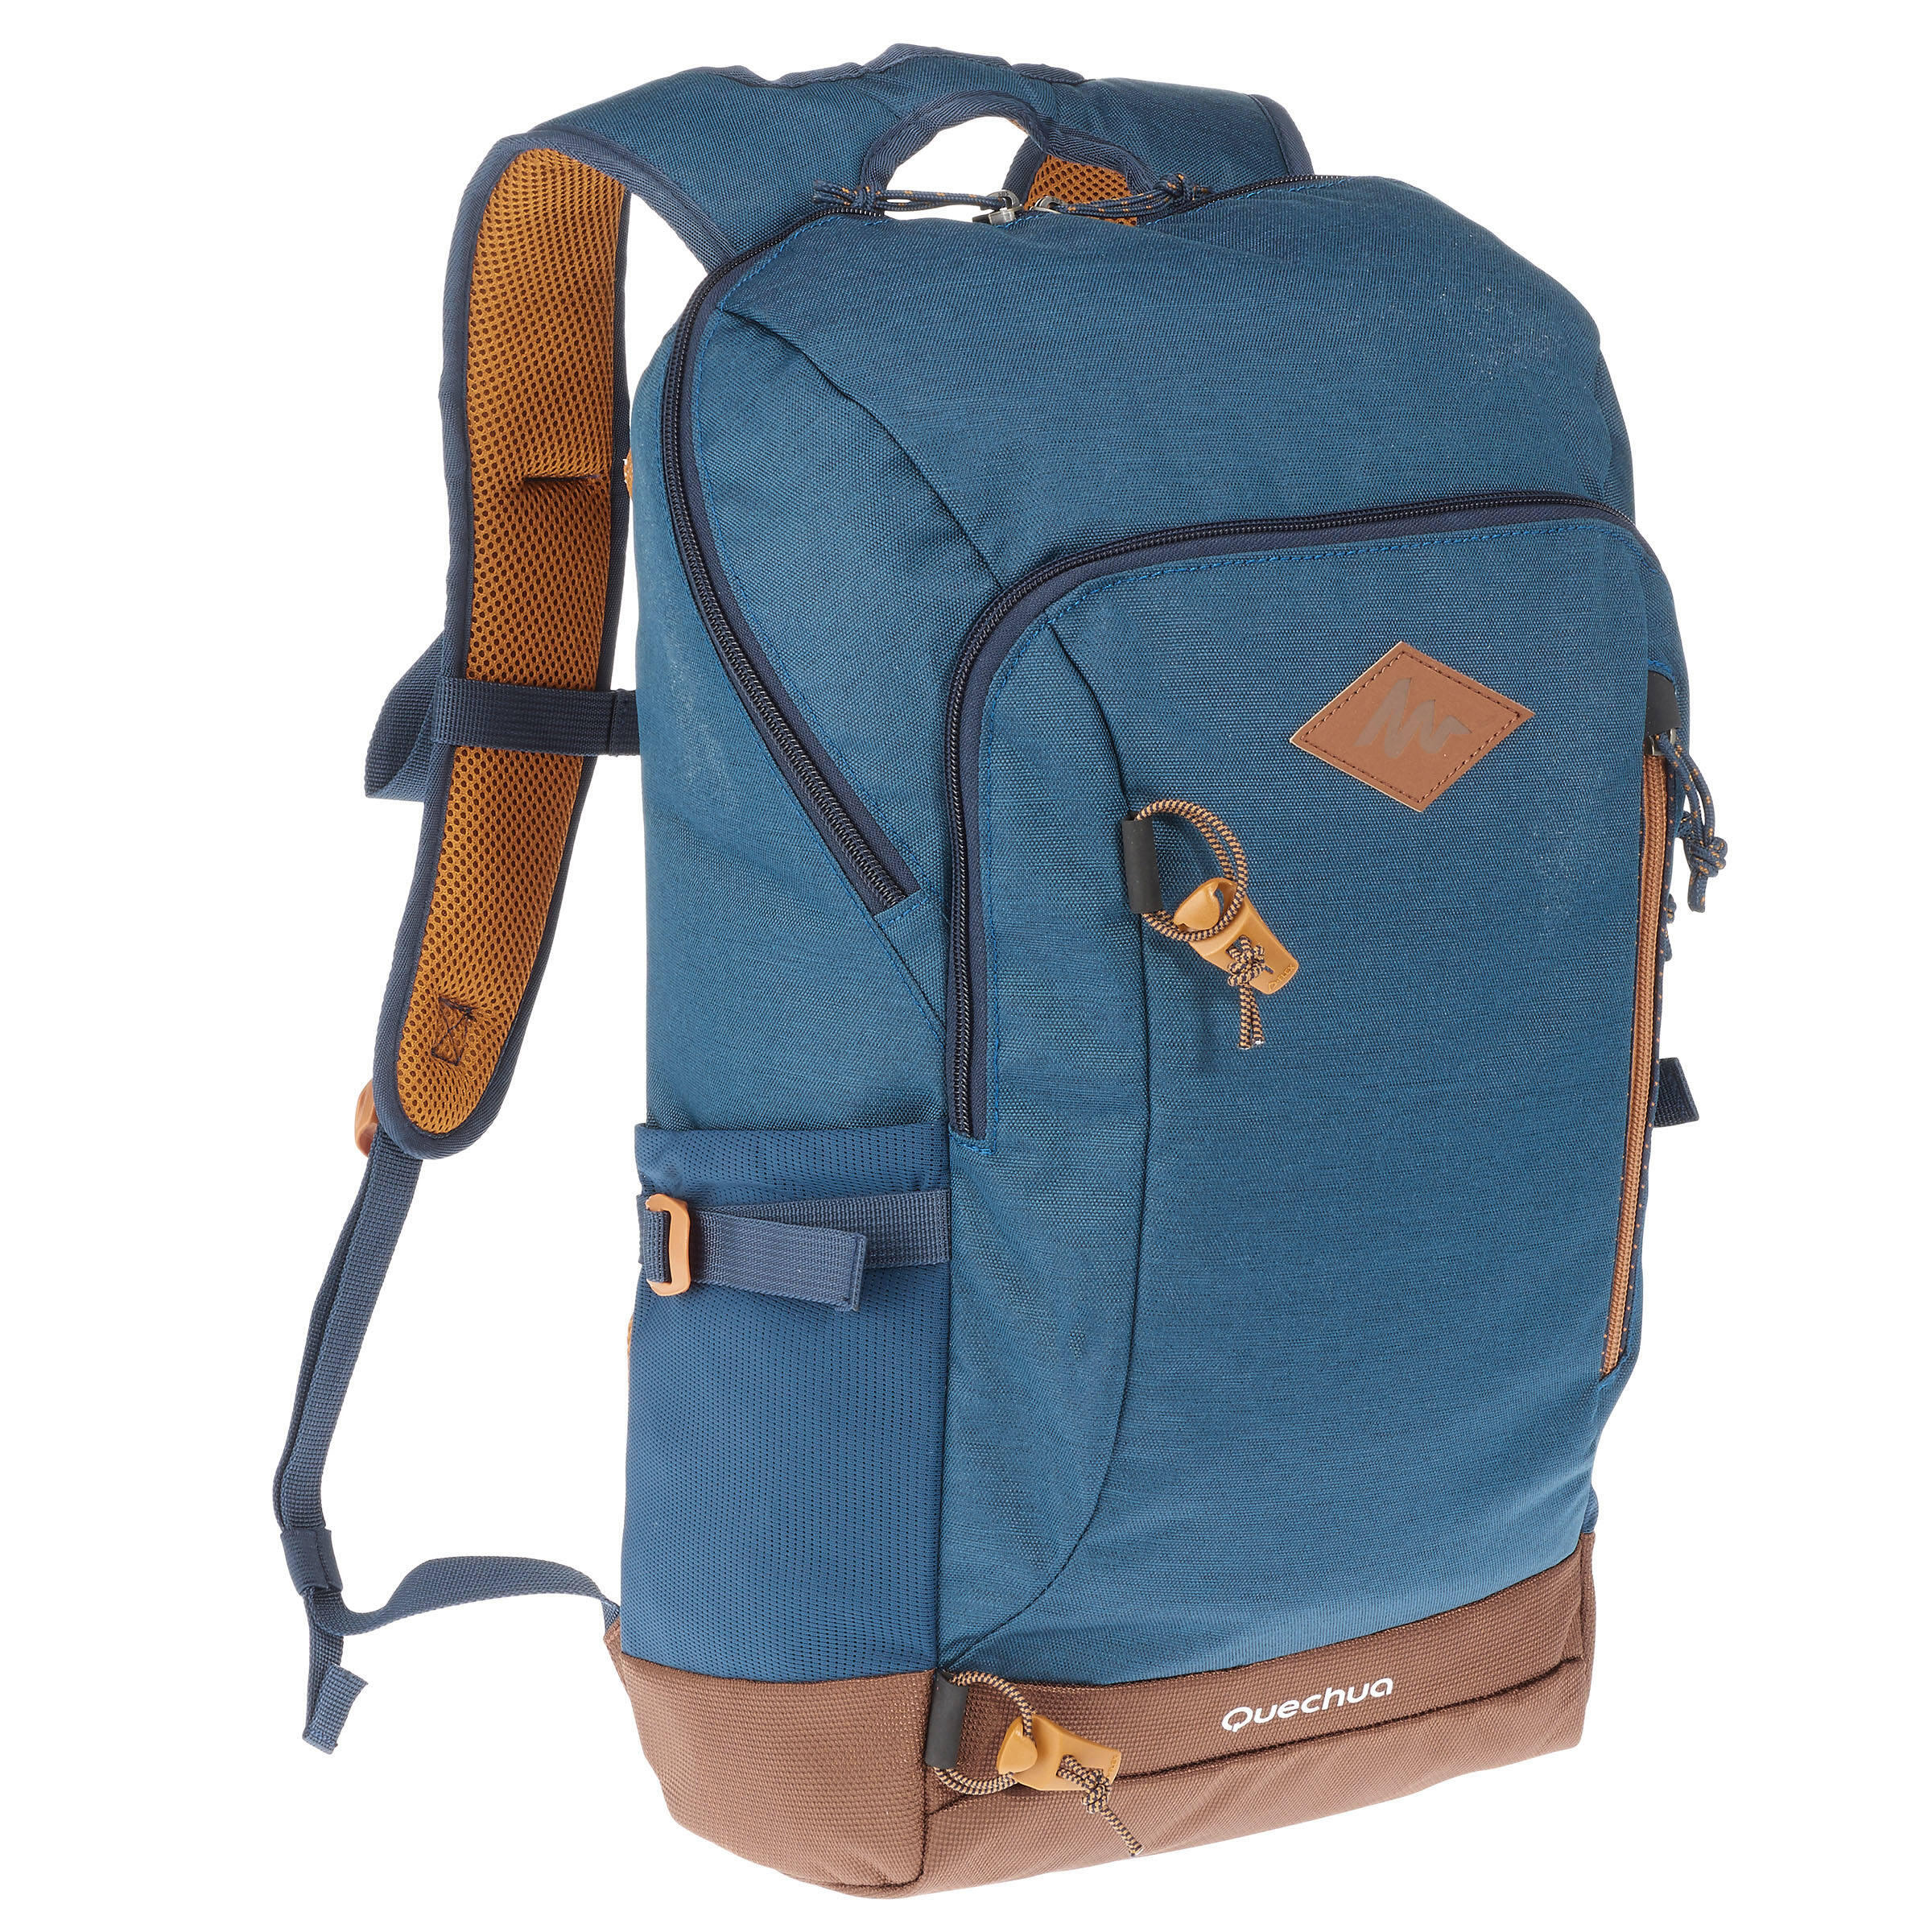 Country Walking Backpack - NH500 - 20 